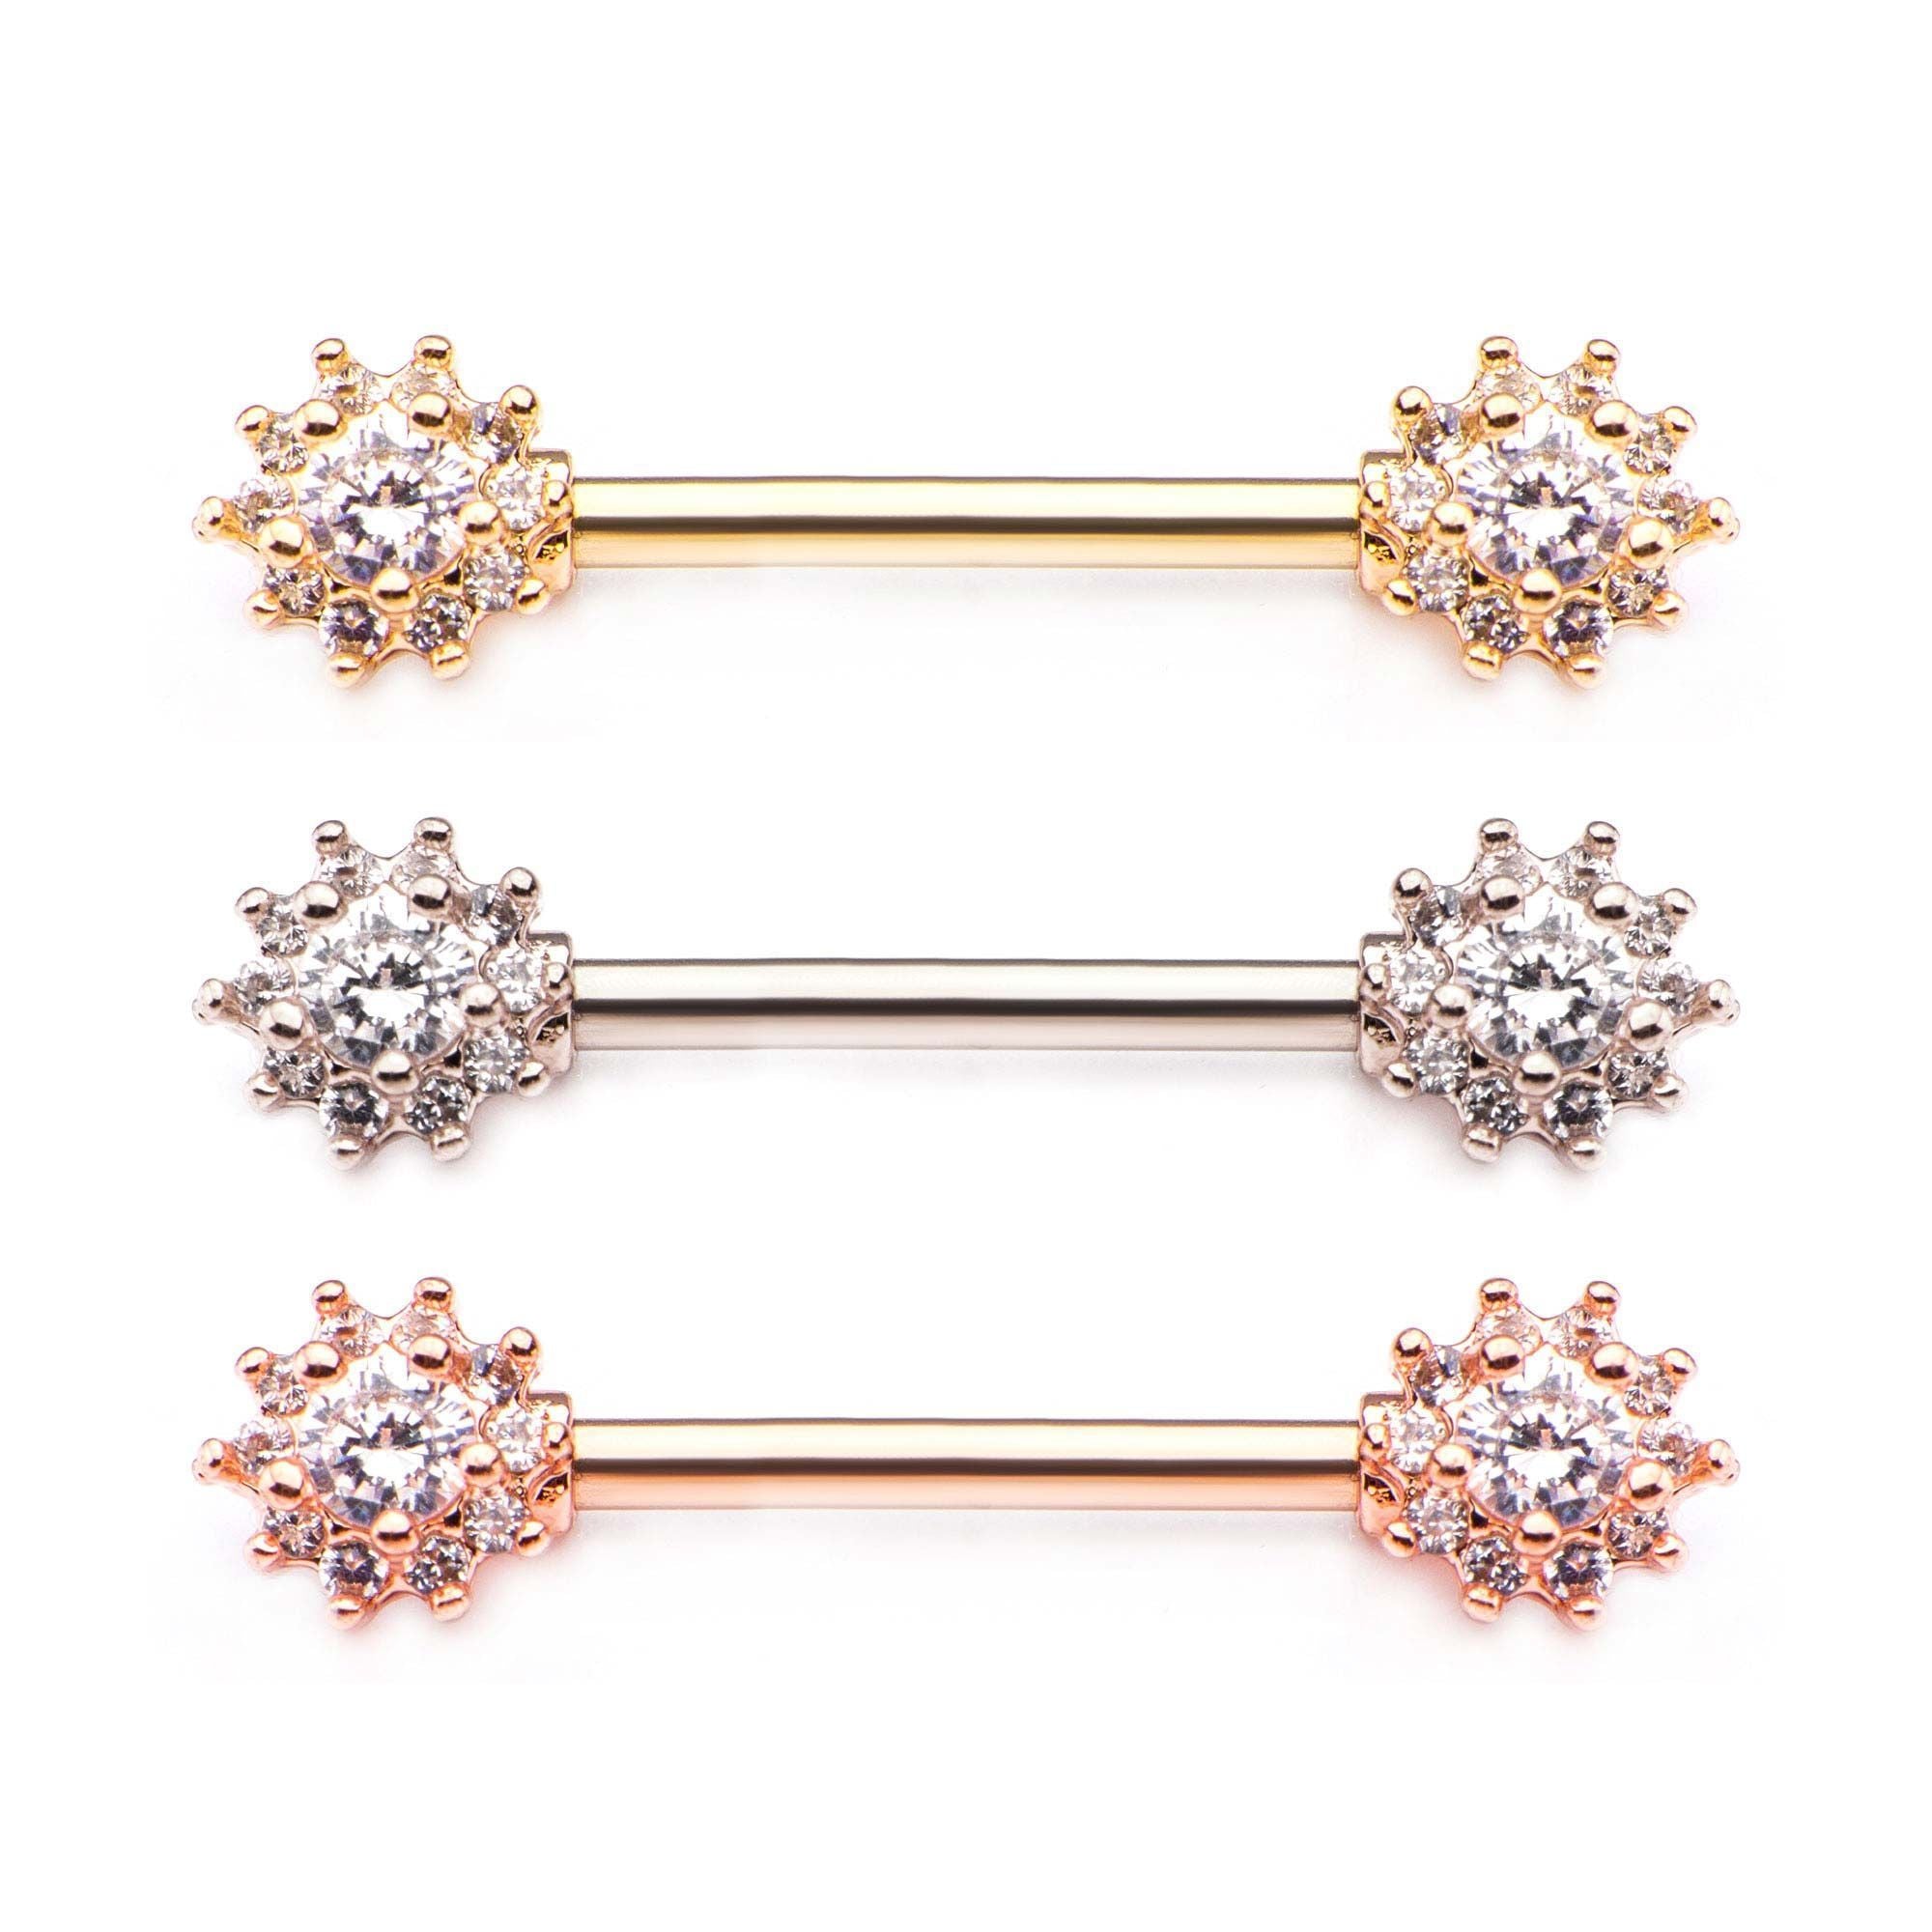 14g 9/16 Forward Facing Round Clear CZ Flower Cluster Nipple Barbells w/ 6mm ends. - 1 Pair sbvnp45711